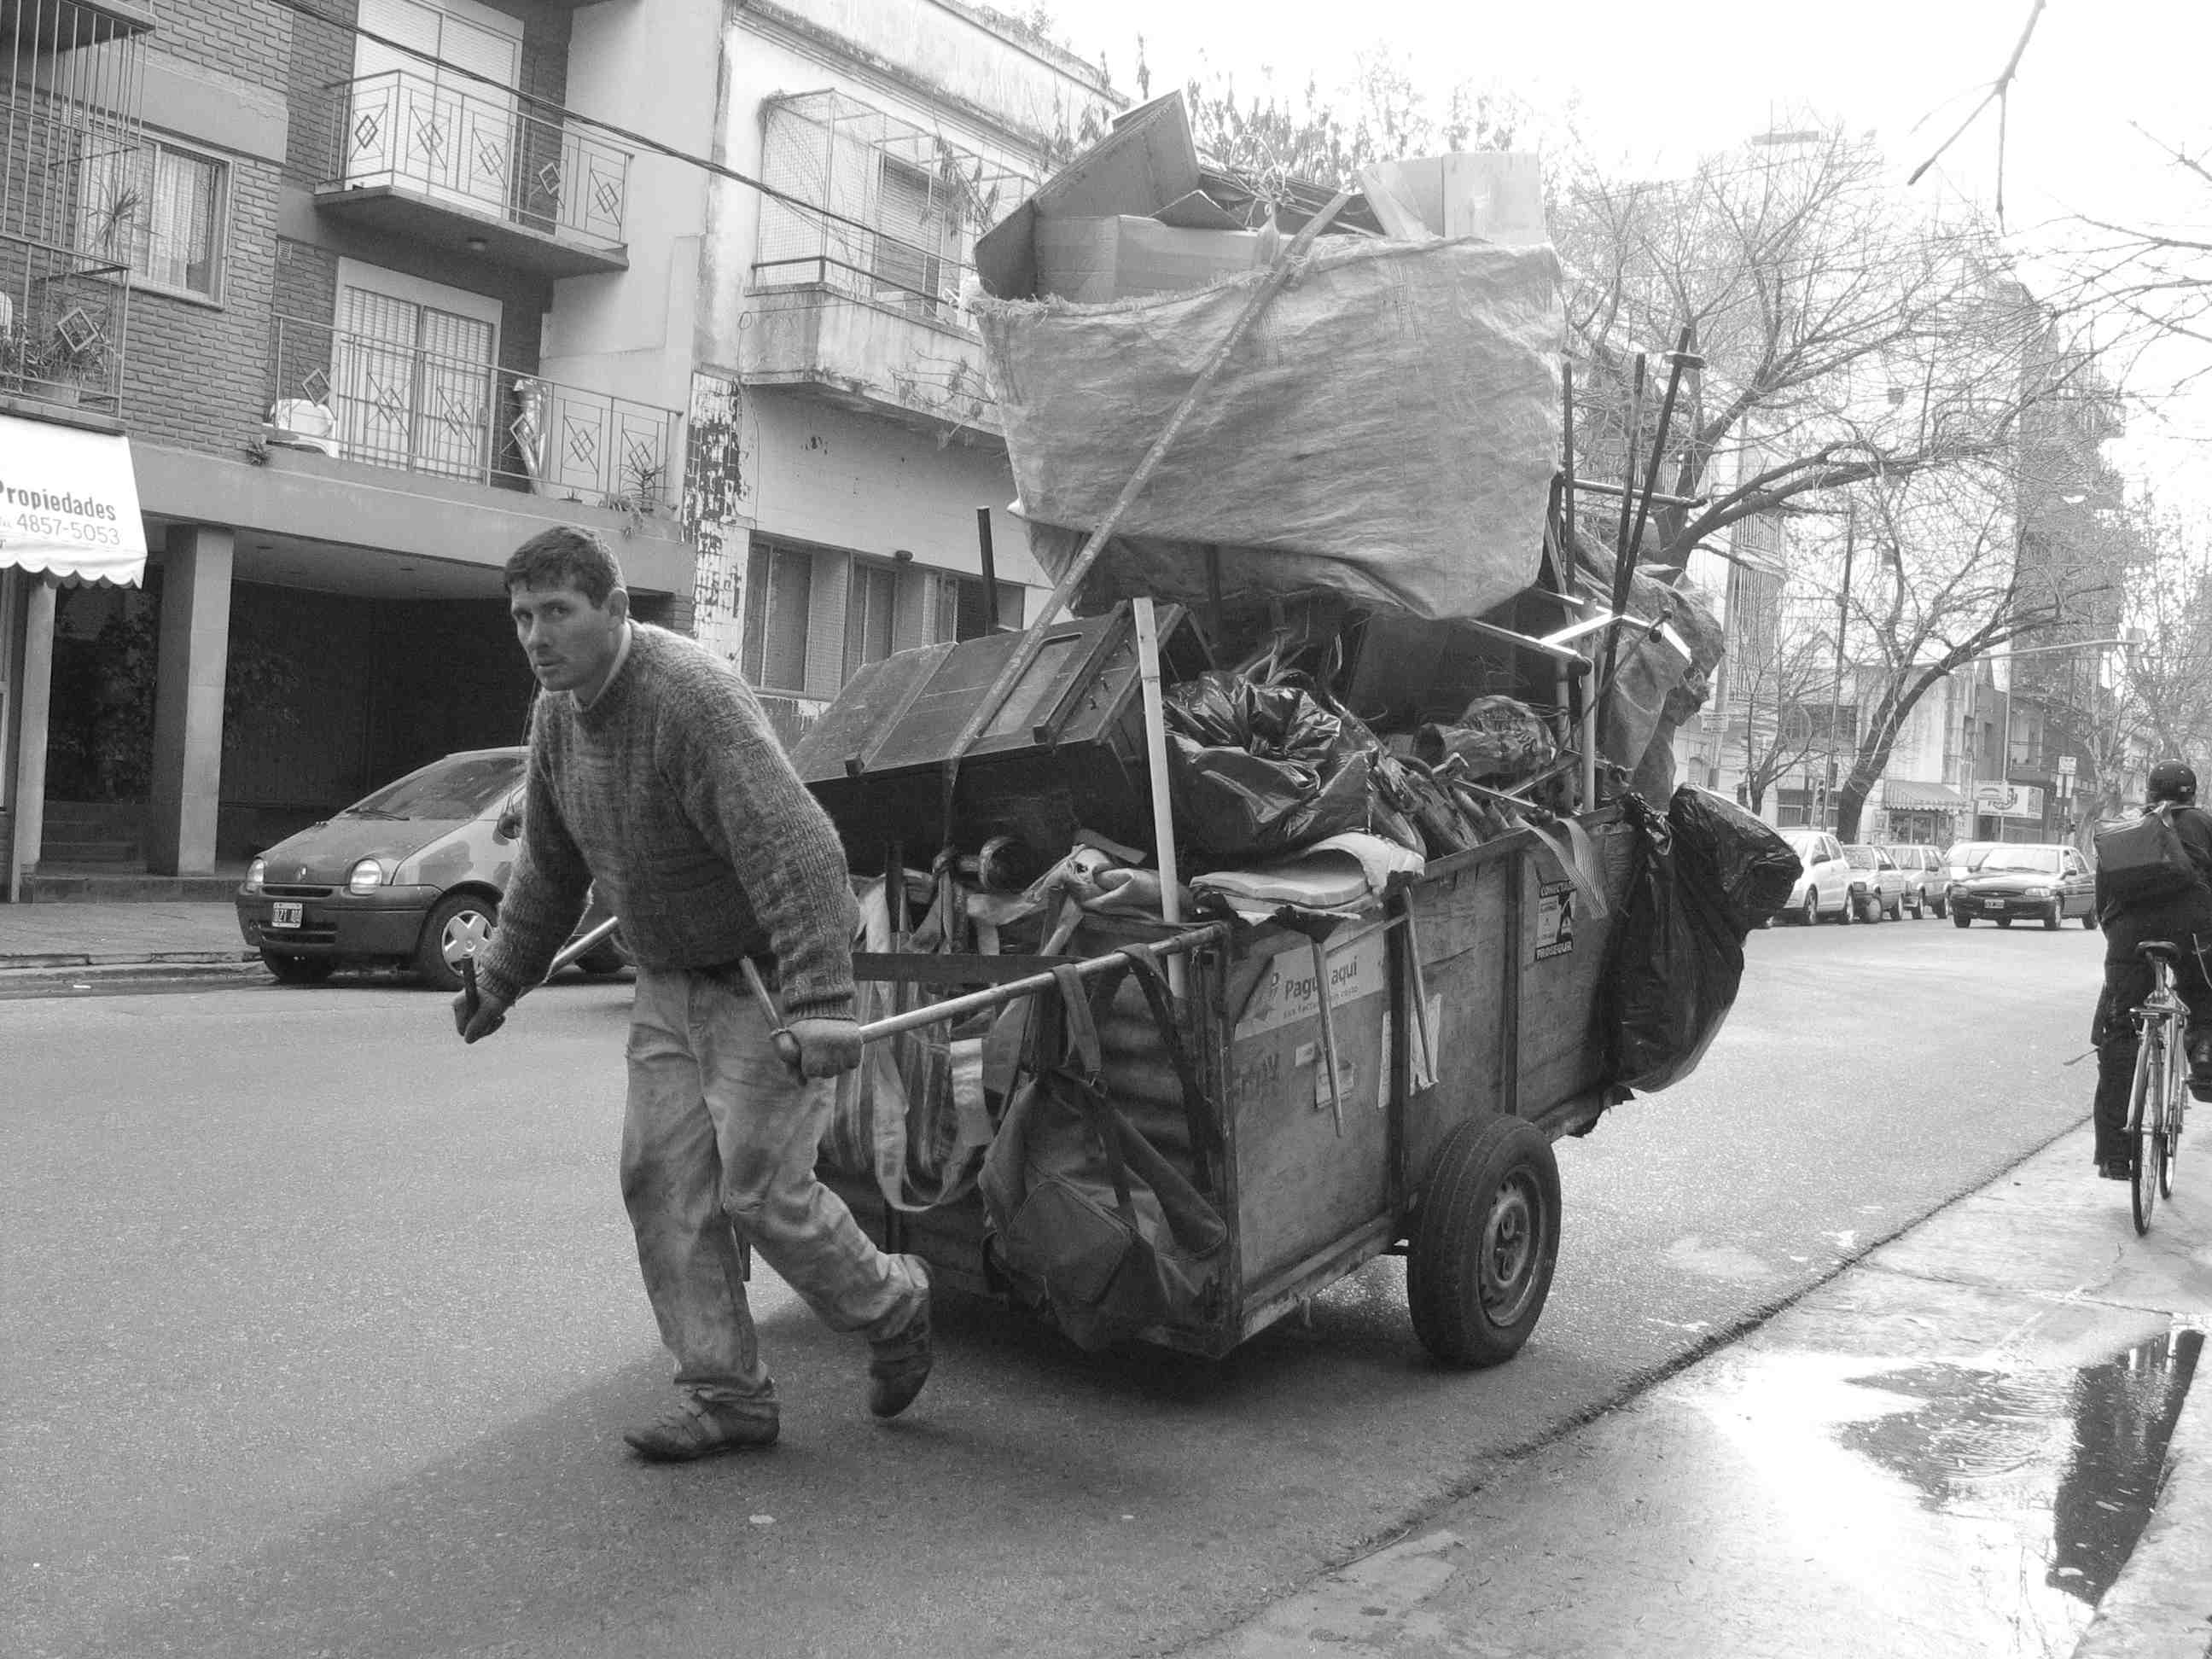 Communities around the world transport, sort through, and upcycle waste. In Mexico, where this photo was taken, these communities are called cartoneros. 